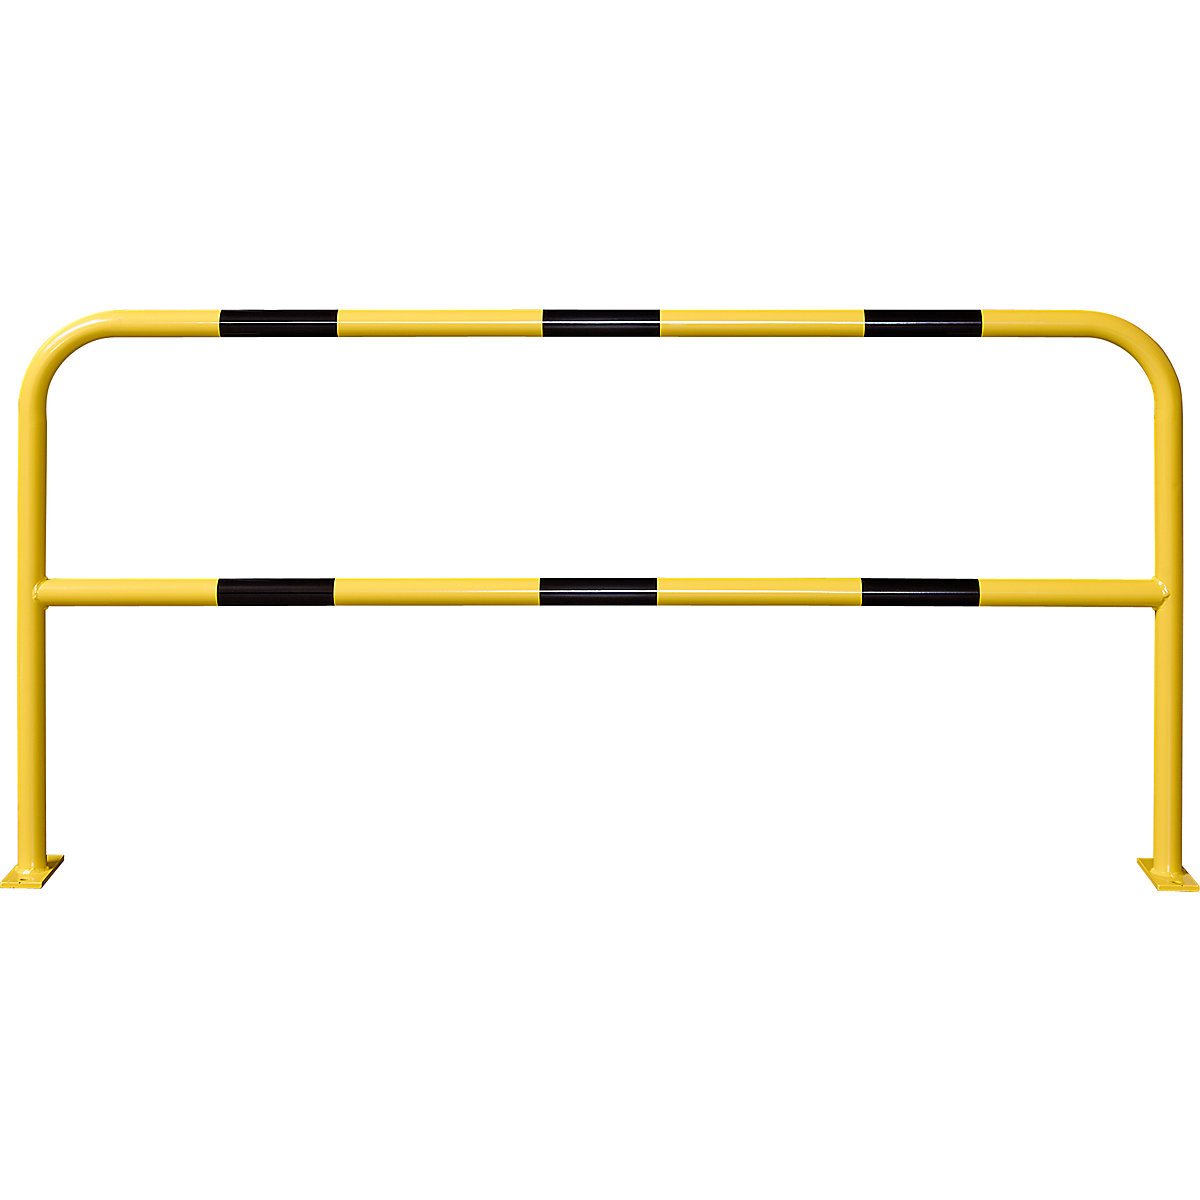 Crash protection bar, round tubing 48/2 mm, for bolting in place, width 2000 mm, plastic coated-5